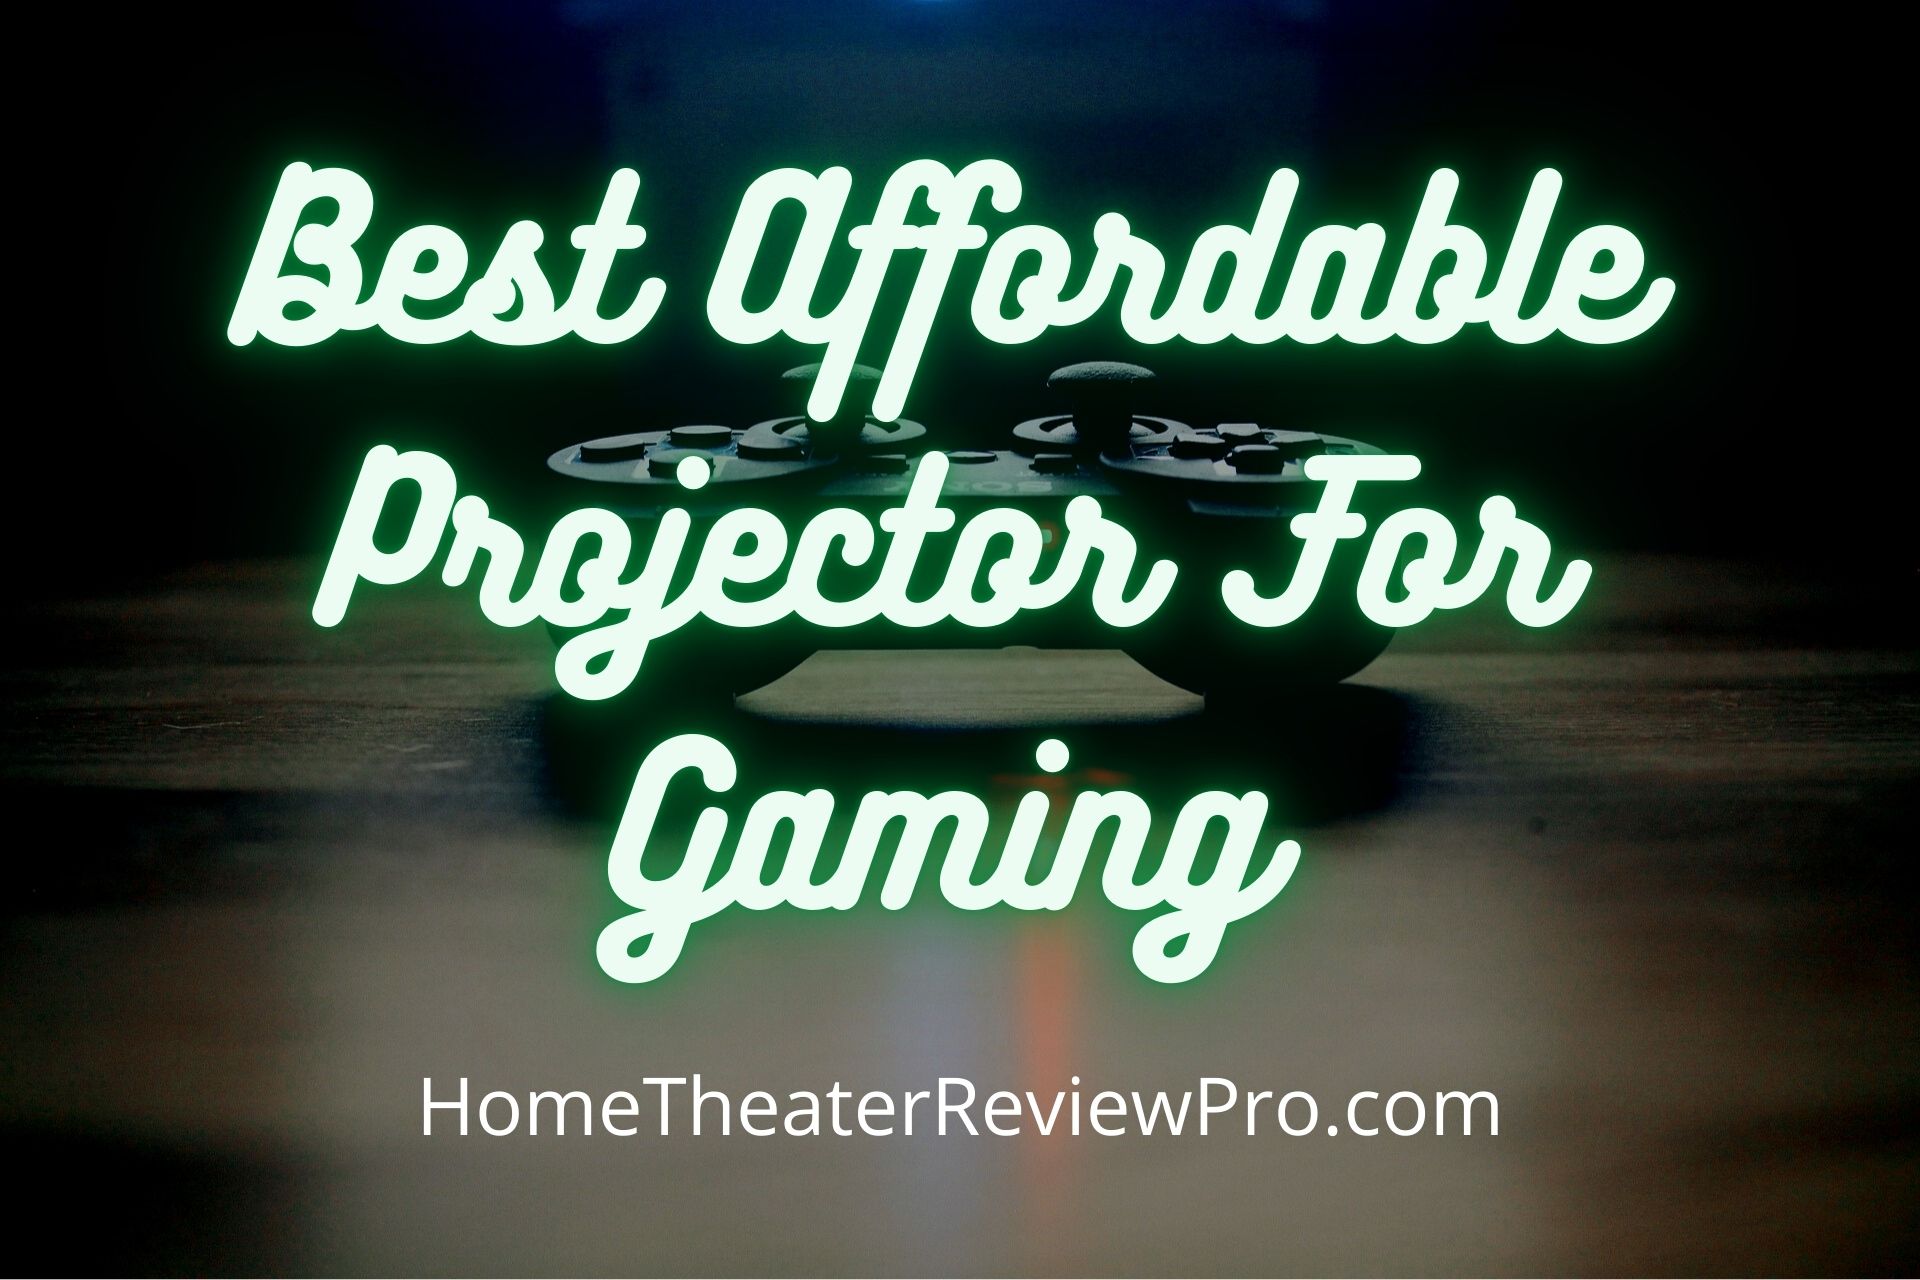 Best Affordable Projector For Gaming feat